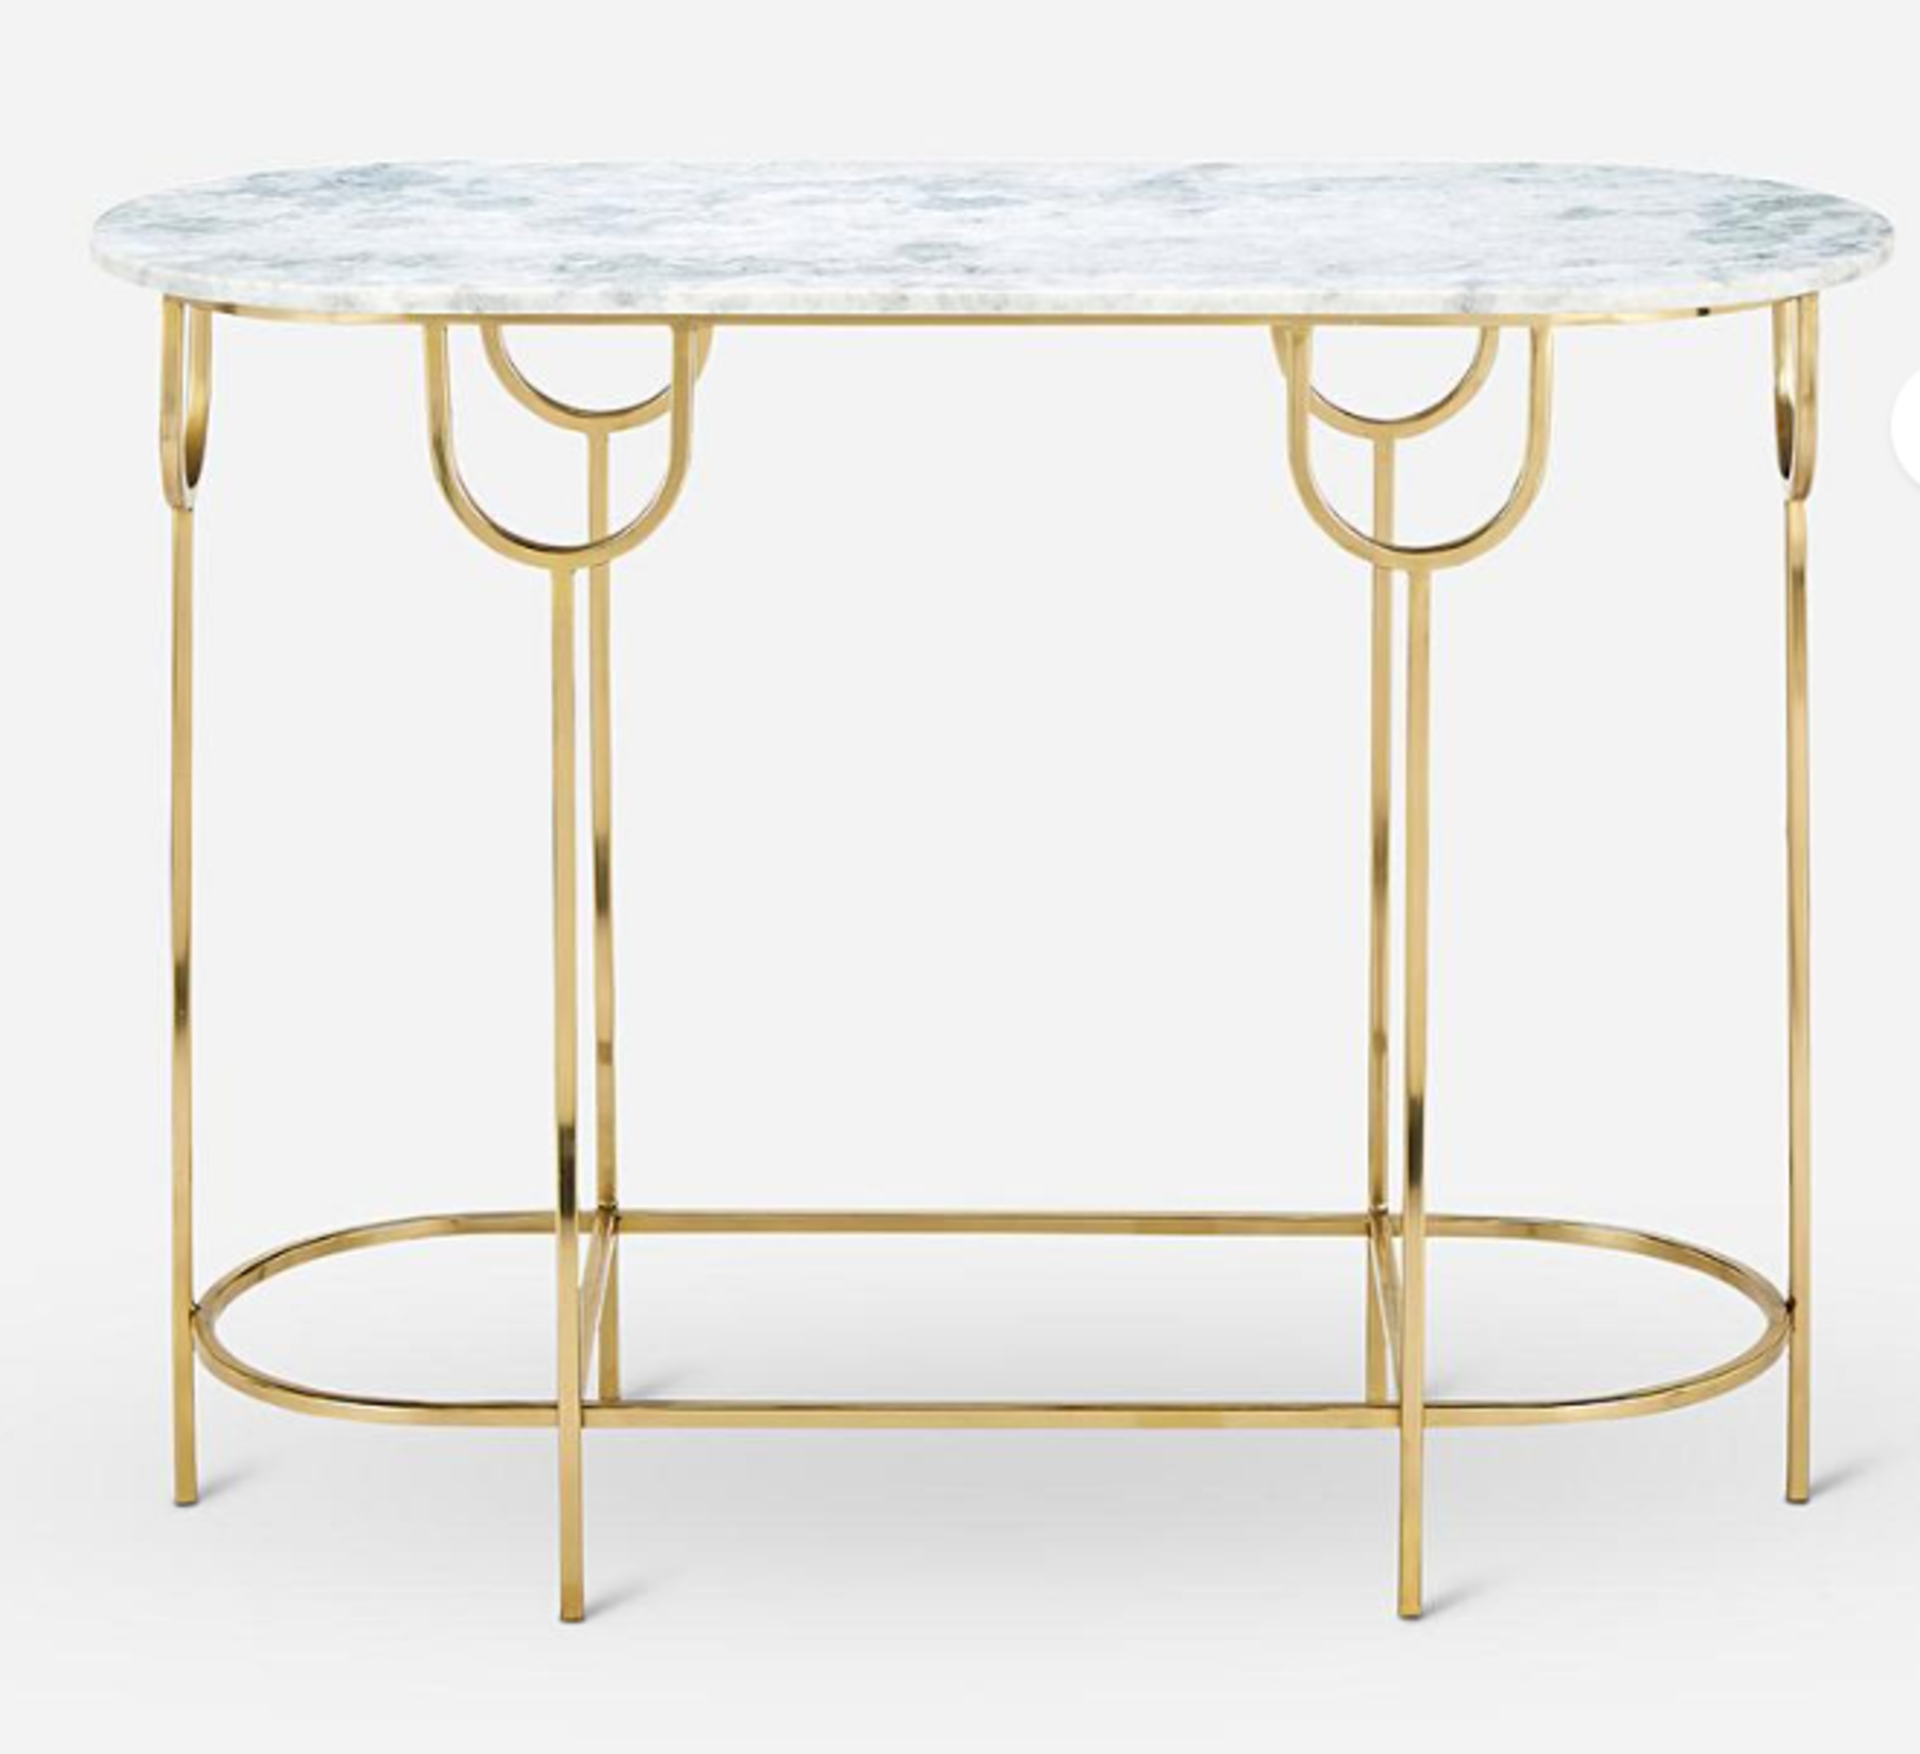 Sophia Marble Console Table. - SR49. RRP £379.00. (91/28) The Sophia Marble Living Range is the